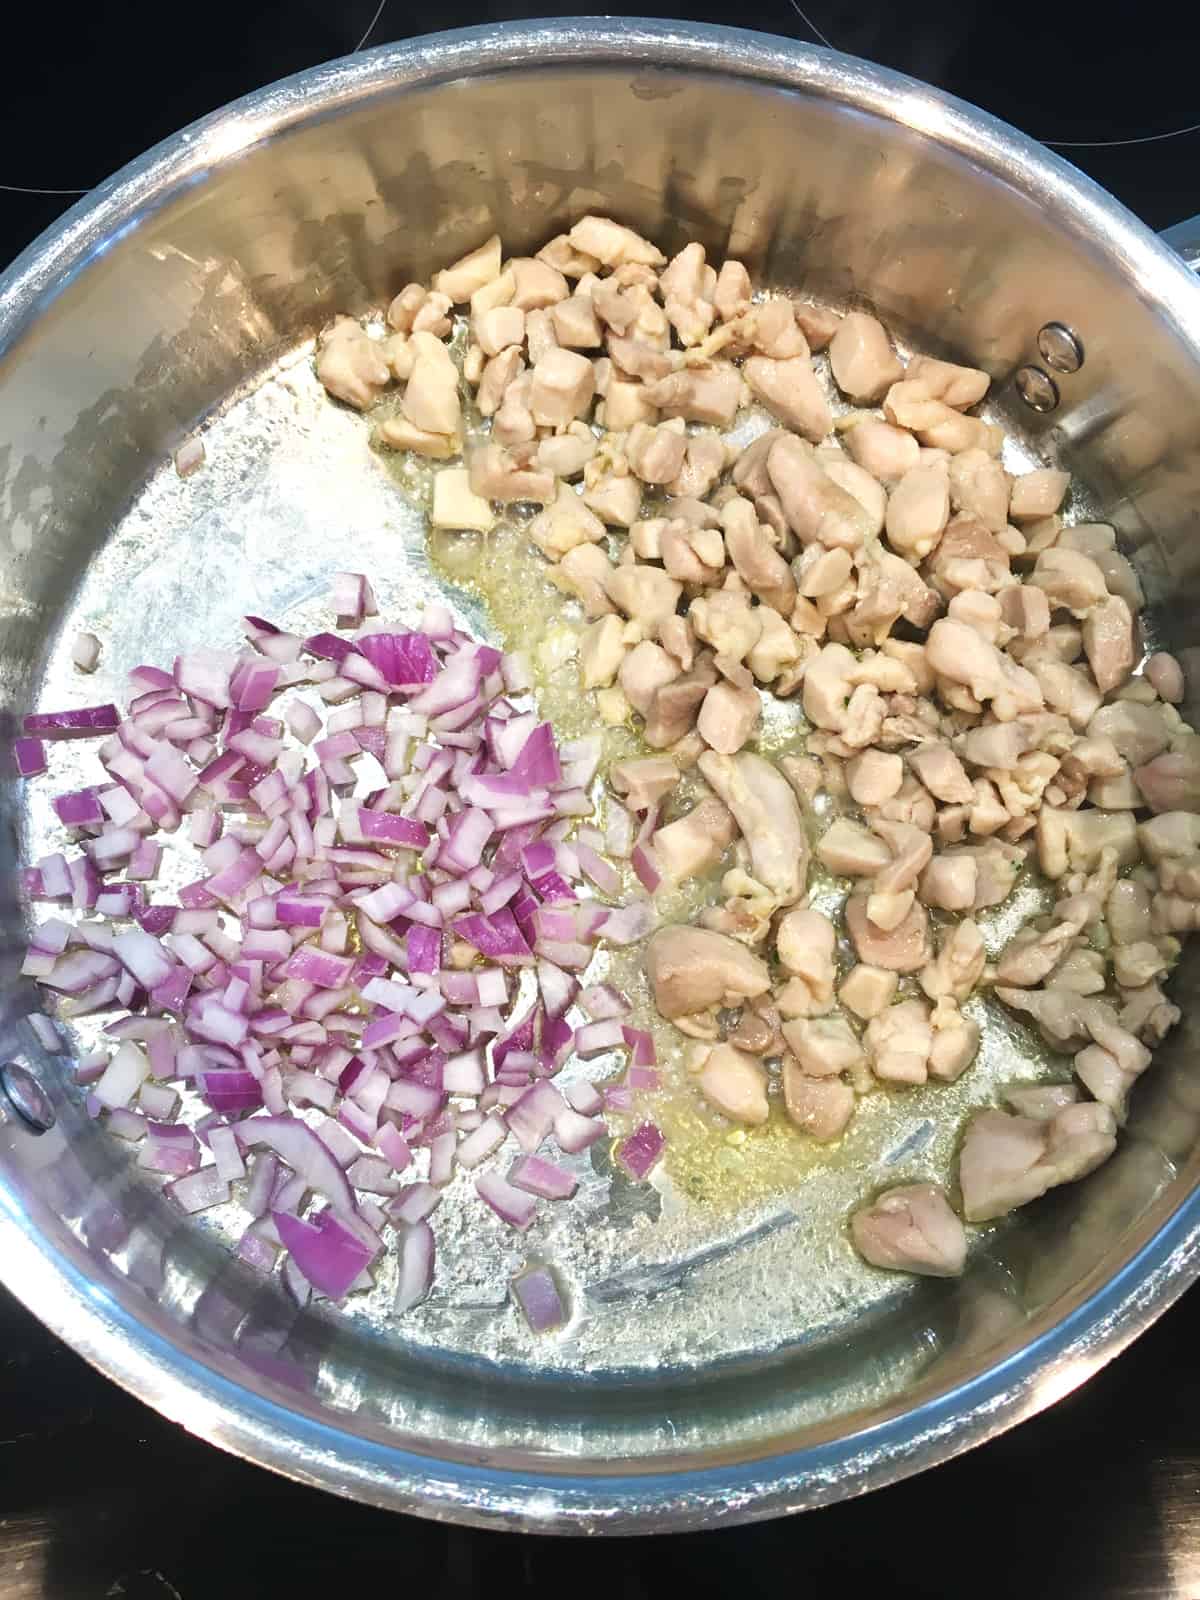 Sautéing red onions and chicken in a stainless steel pan